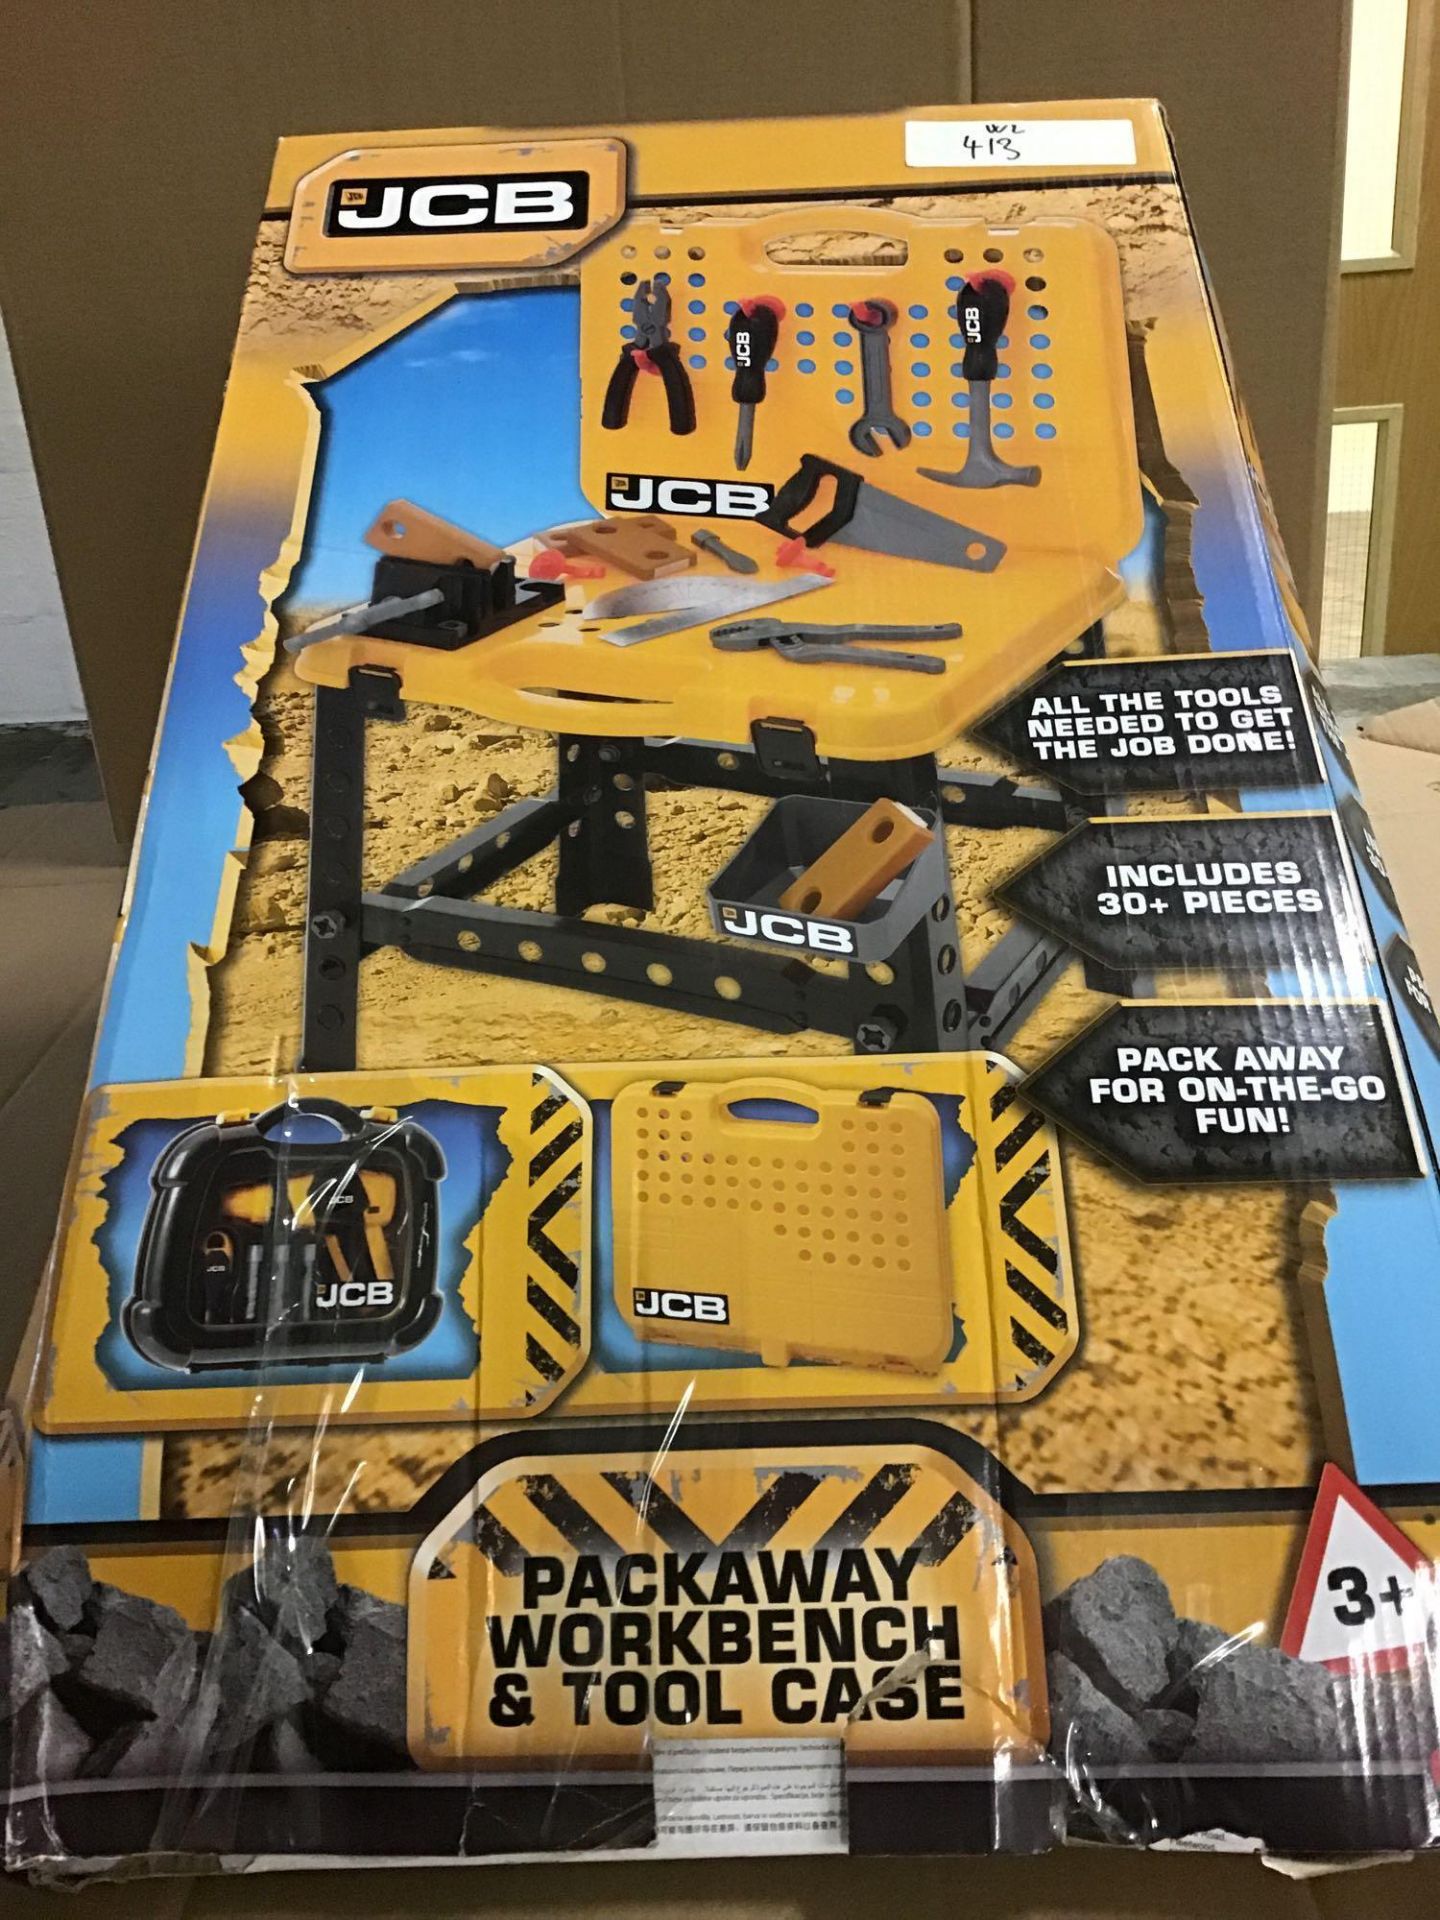 JCB Workbench and Tool Case Playset 917/6313 - £20.00 RRP - Image 2 of 4